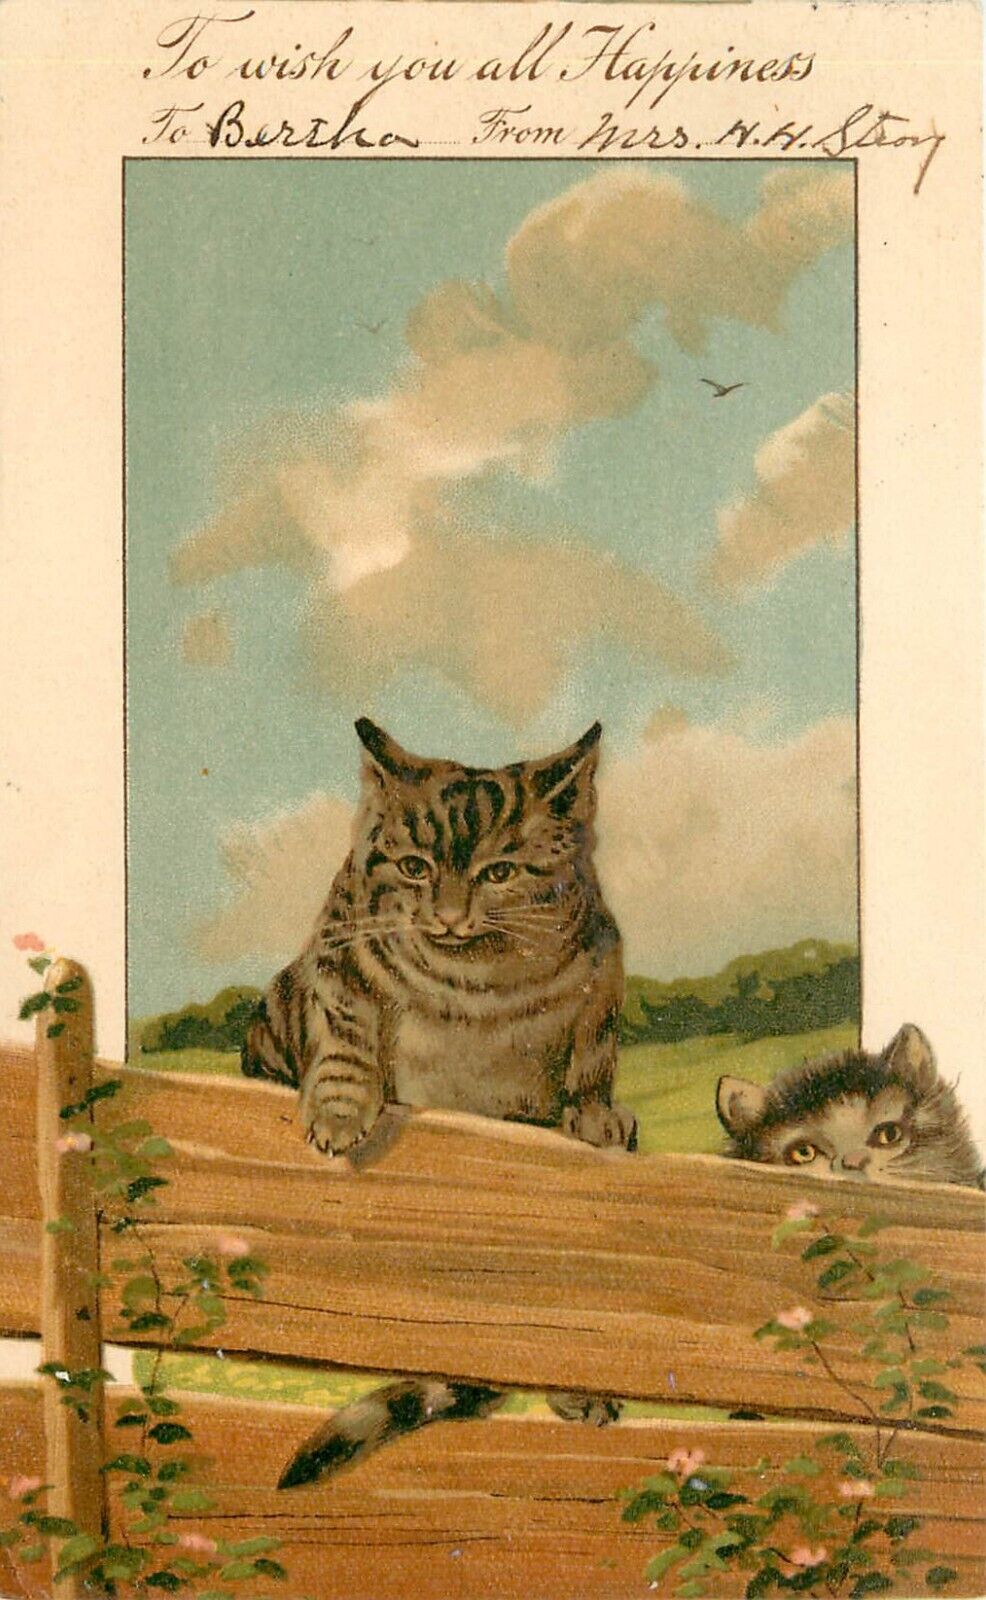 IAPC Postcard 5993. Brown Tabby Cats on Fence to Wish You All Happiness, Germany